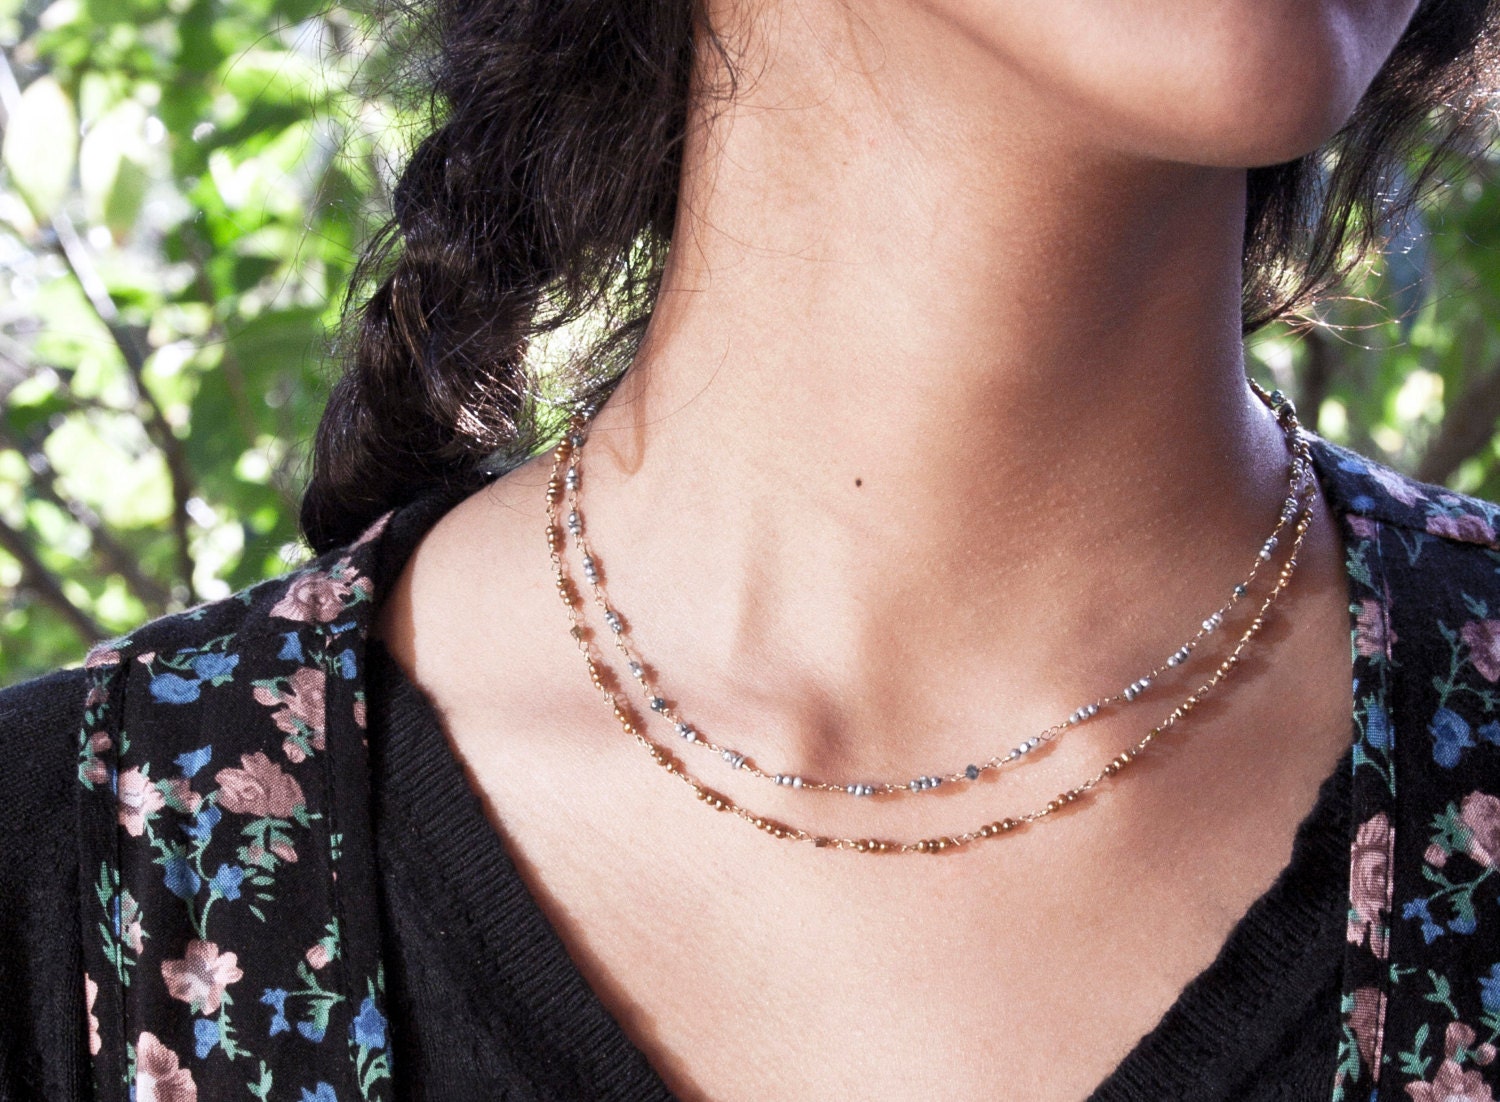 Layered gold and silver pearl necklace by judithadelsonjewelry